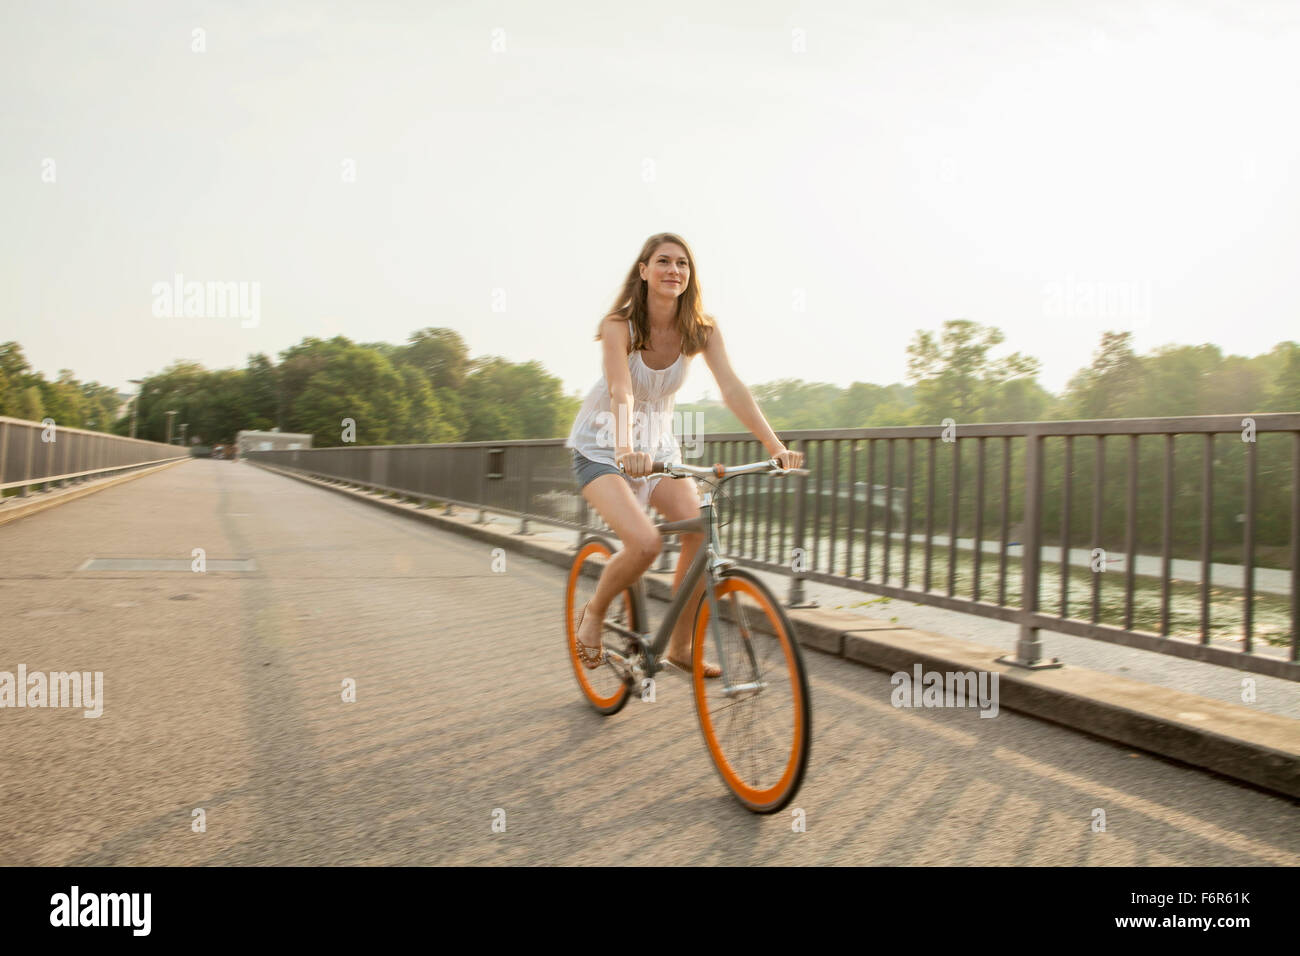 Young woman riding bicycle on city bridge Banque D'Images